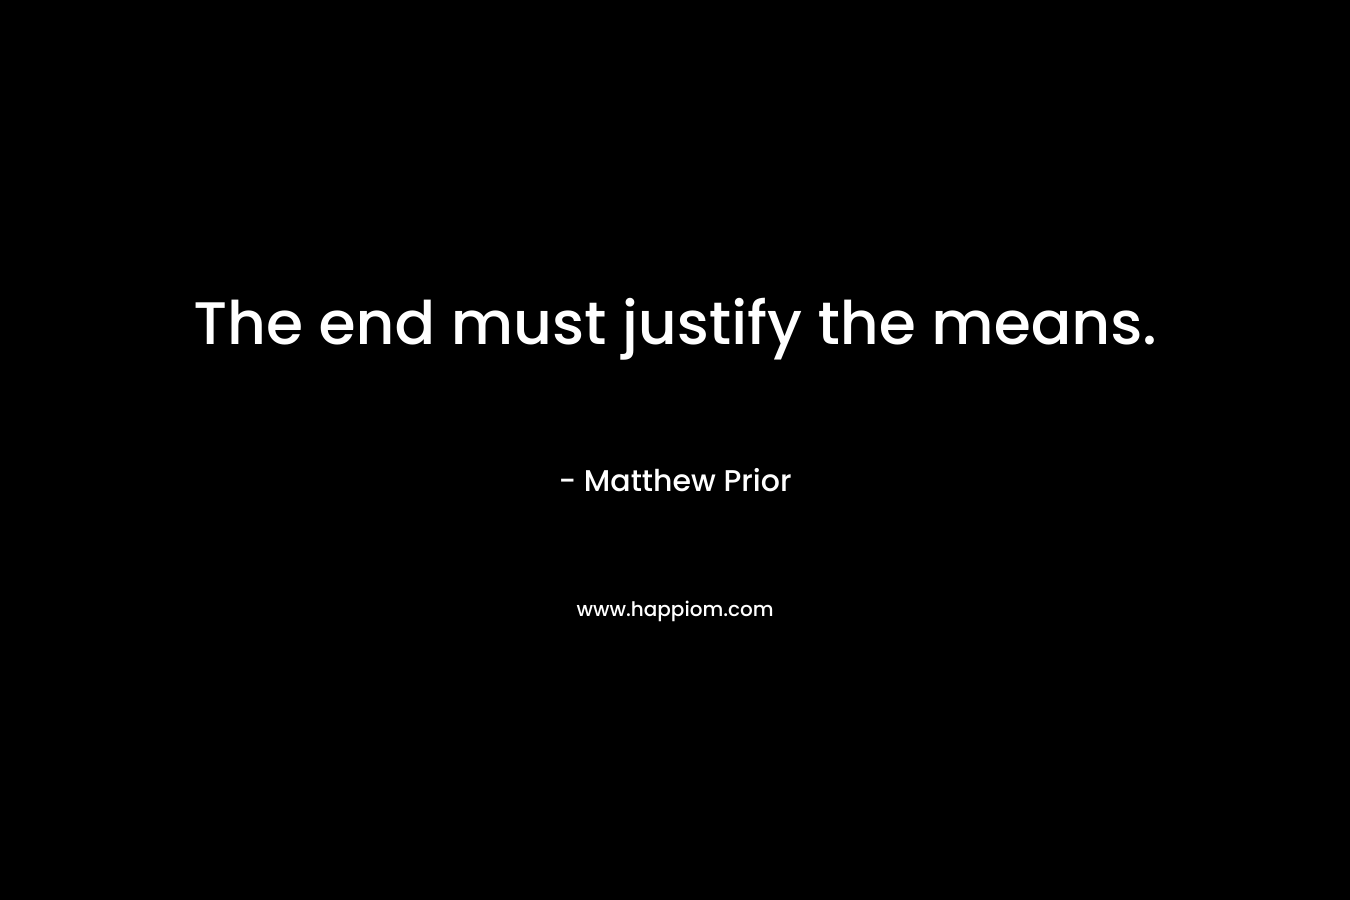 The end must justify the means.